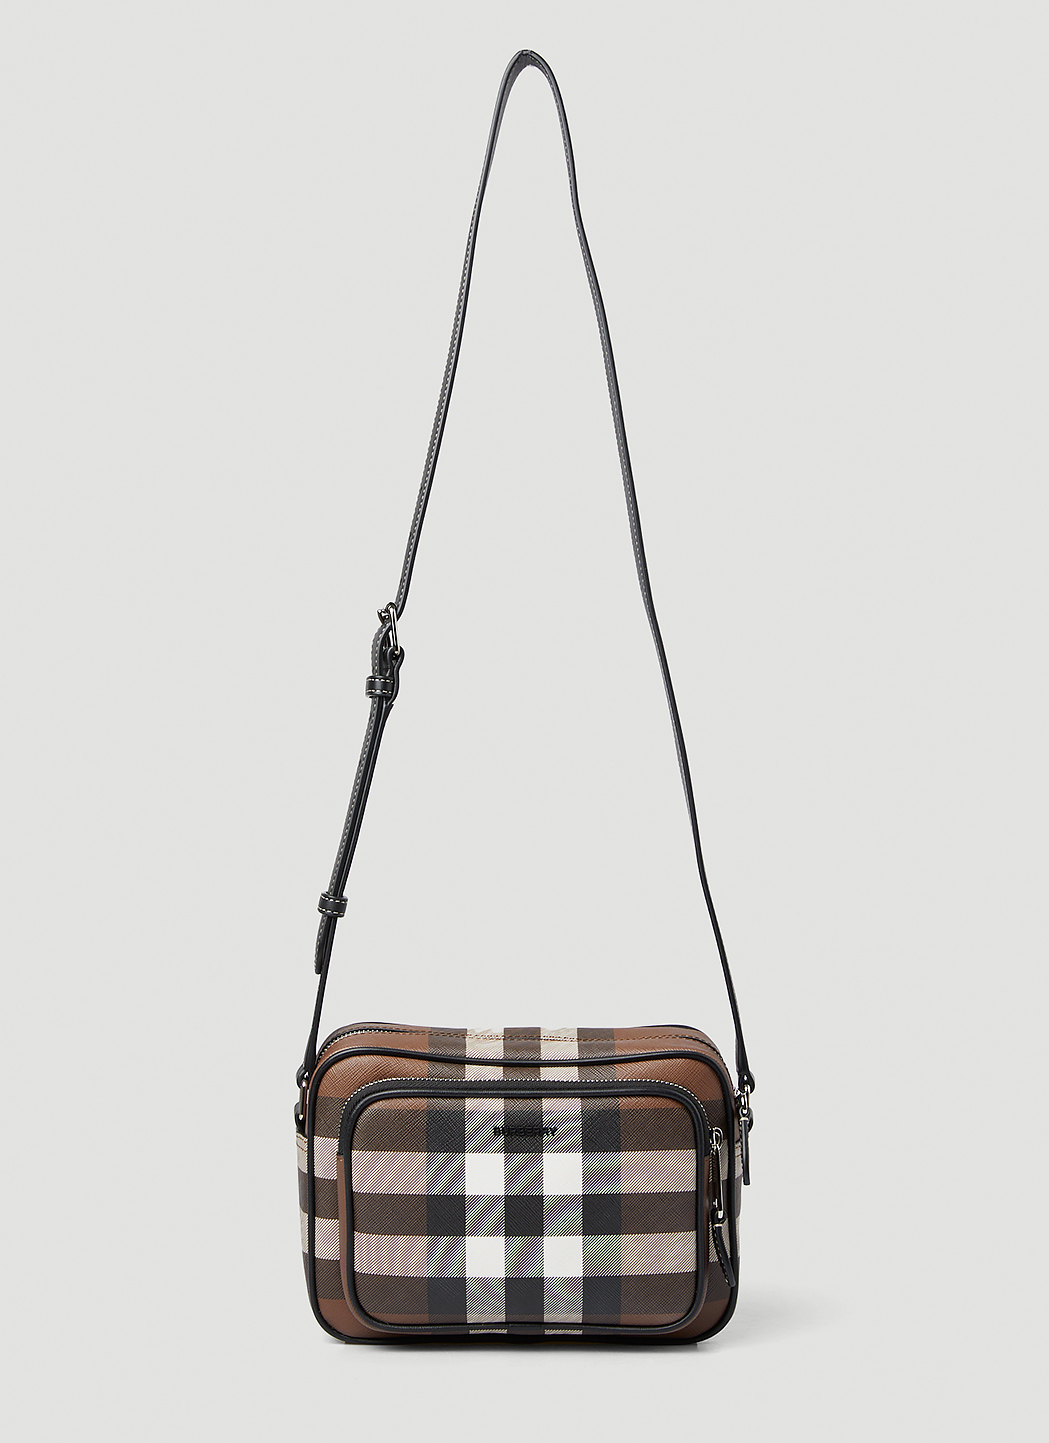 GUESS Bags for Women - Vestiaire Collective